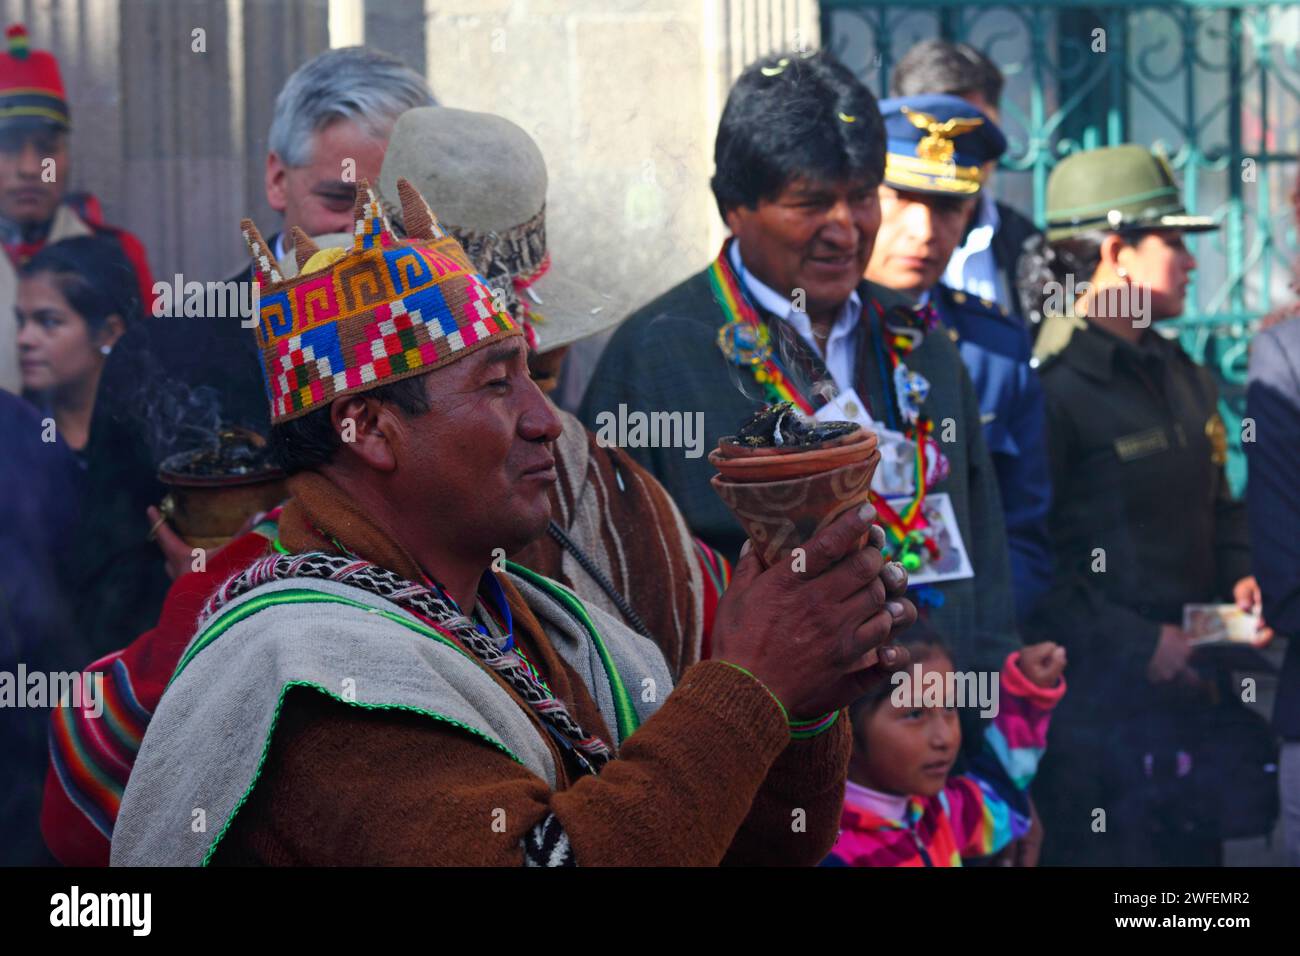 La Paz, BOLIVIA; 24th January 2015. An Aymara amauta or shaman wearing a woollen four-cornered hat performs rituals with an incense burner in front of Bolivian president Evo Morales at an event to mark the start of the Alasitas festival in La Paz. Behind the shaman is the vice president Alvaro Garcia Linera. Stock Photo